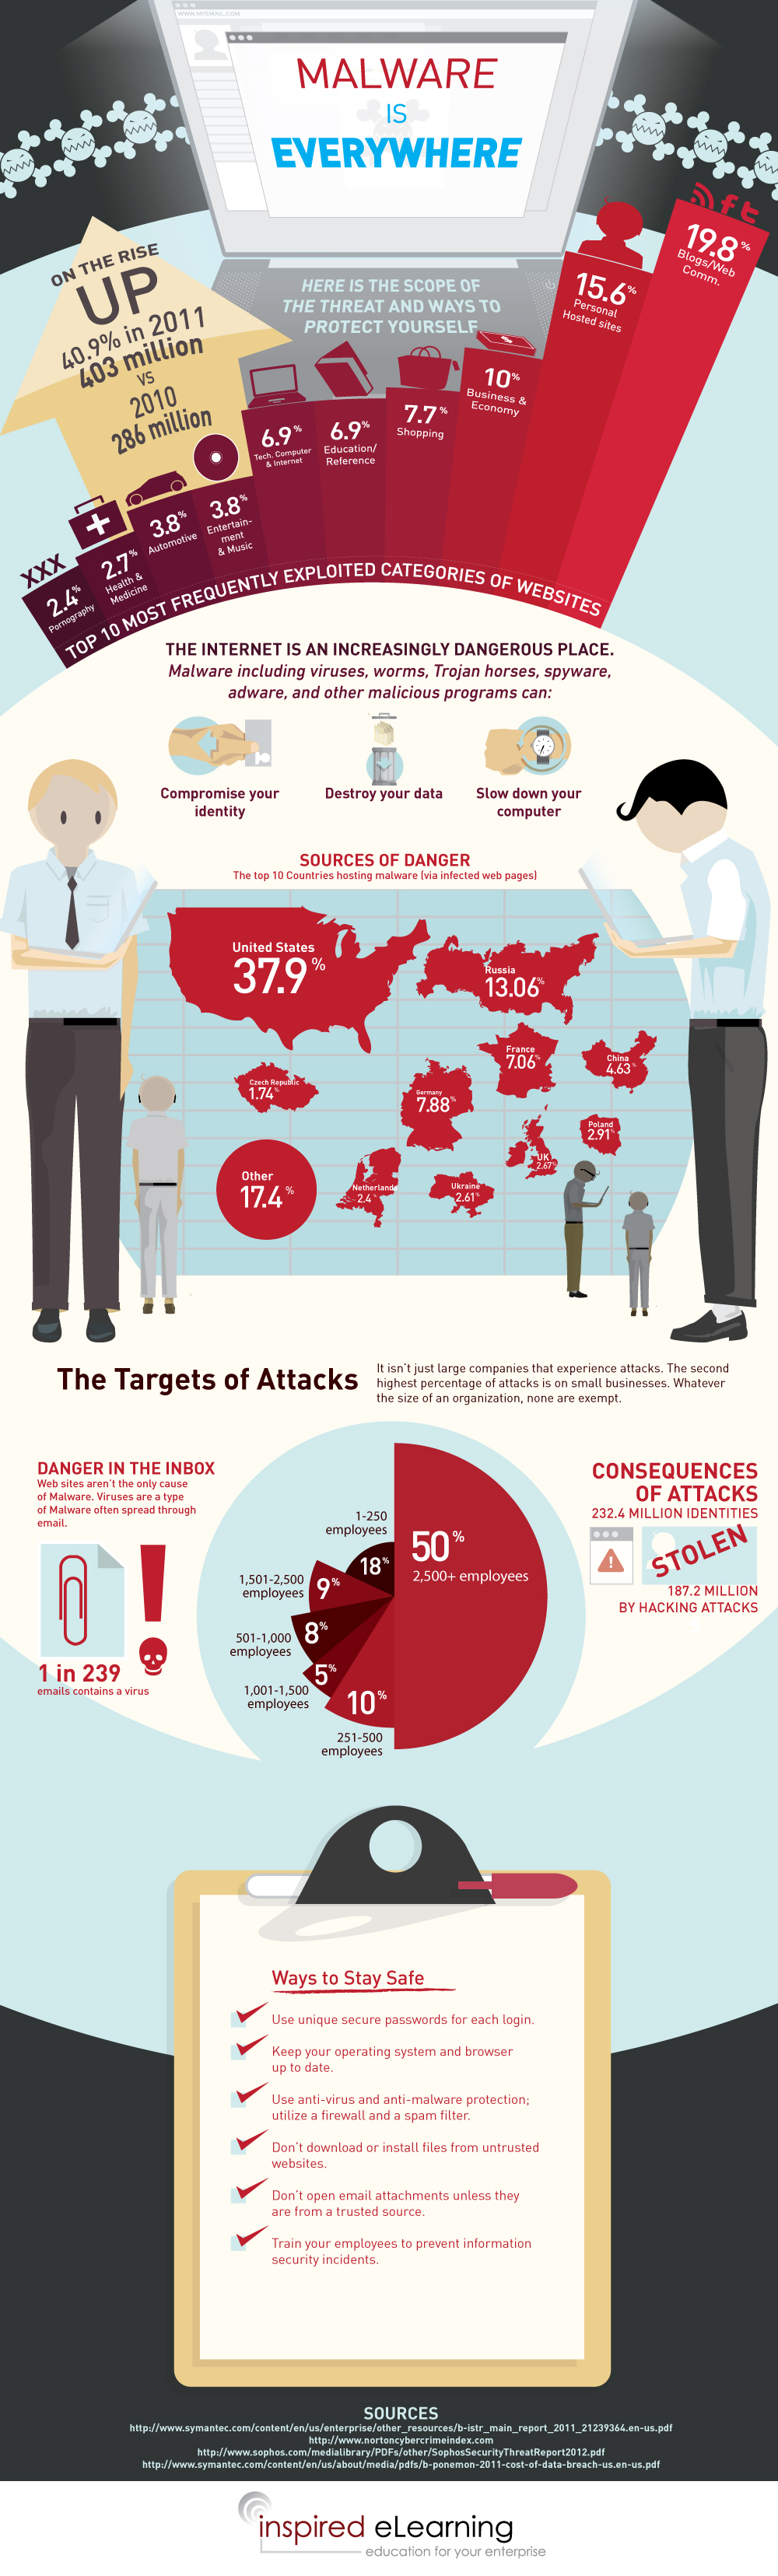 Malware is Everywhere: Infographic on Security Awareness